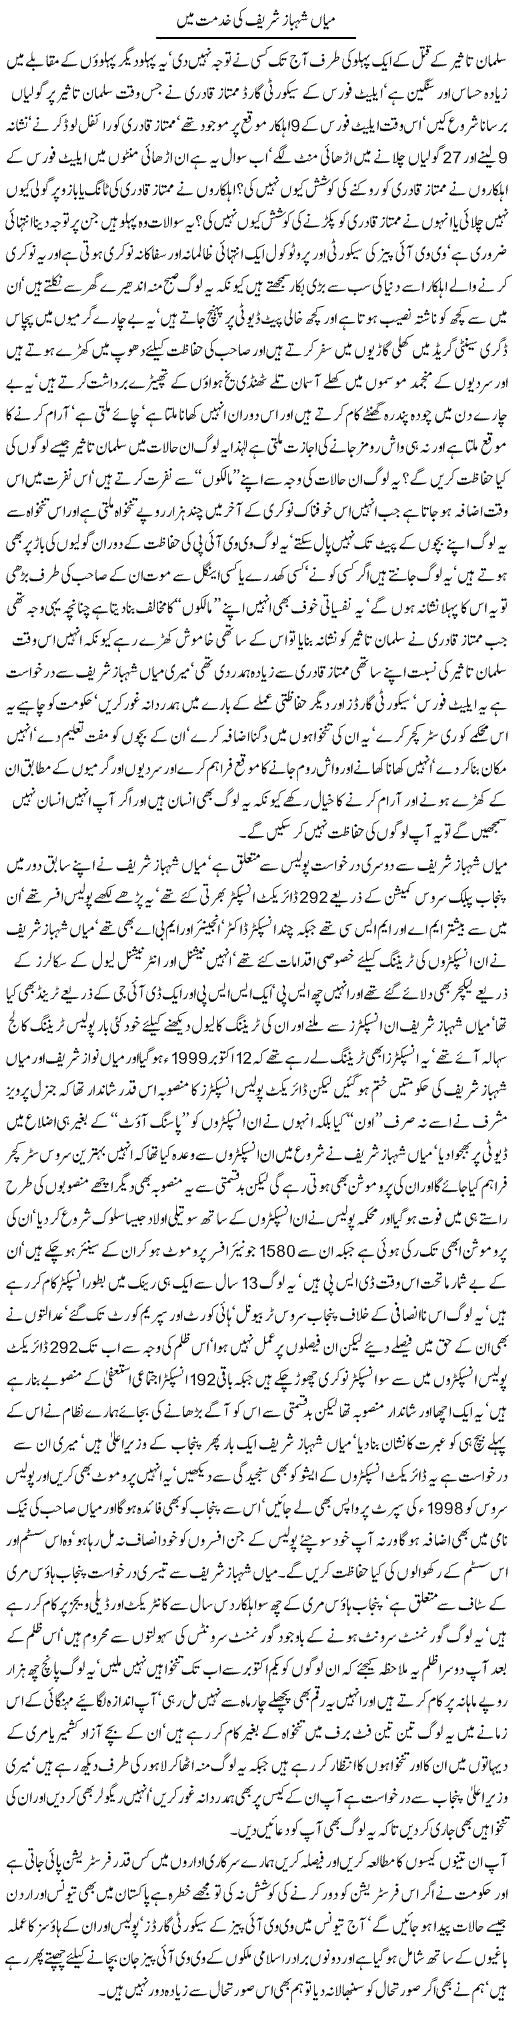 Request To Shahbaz Express Column Javed Chaudhry 18 January 2011